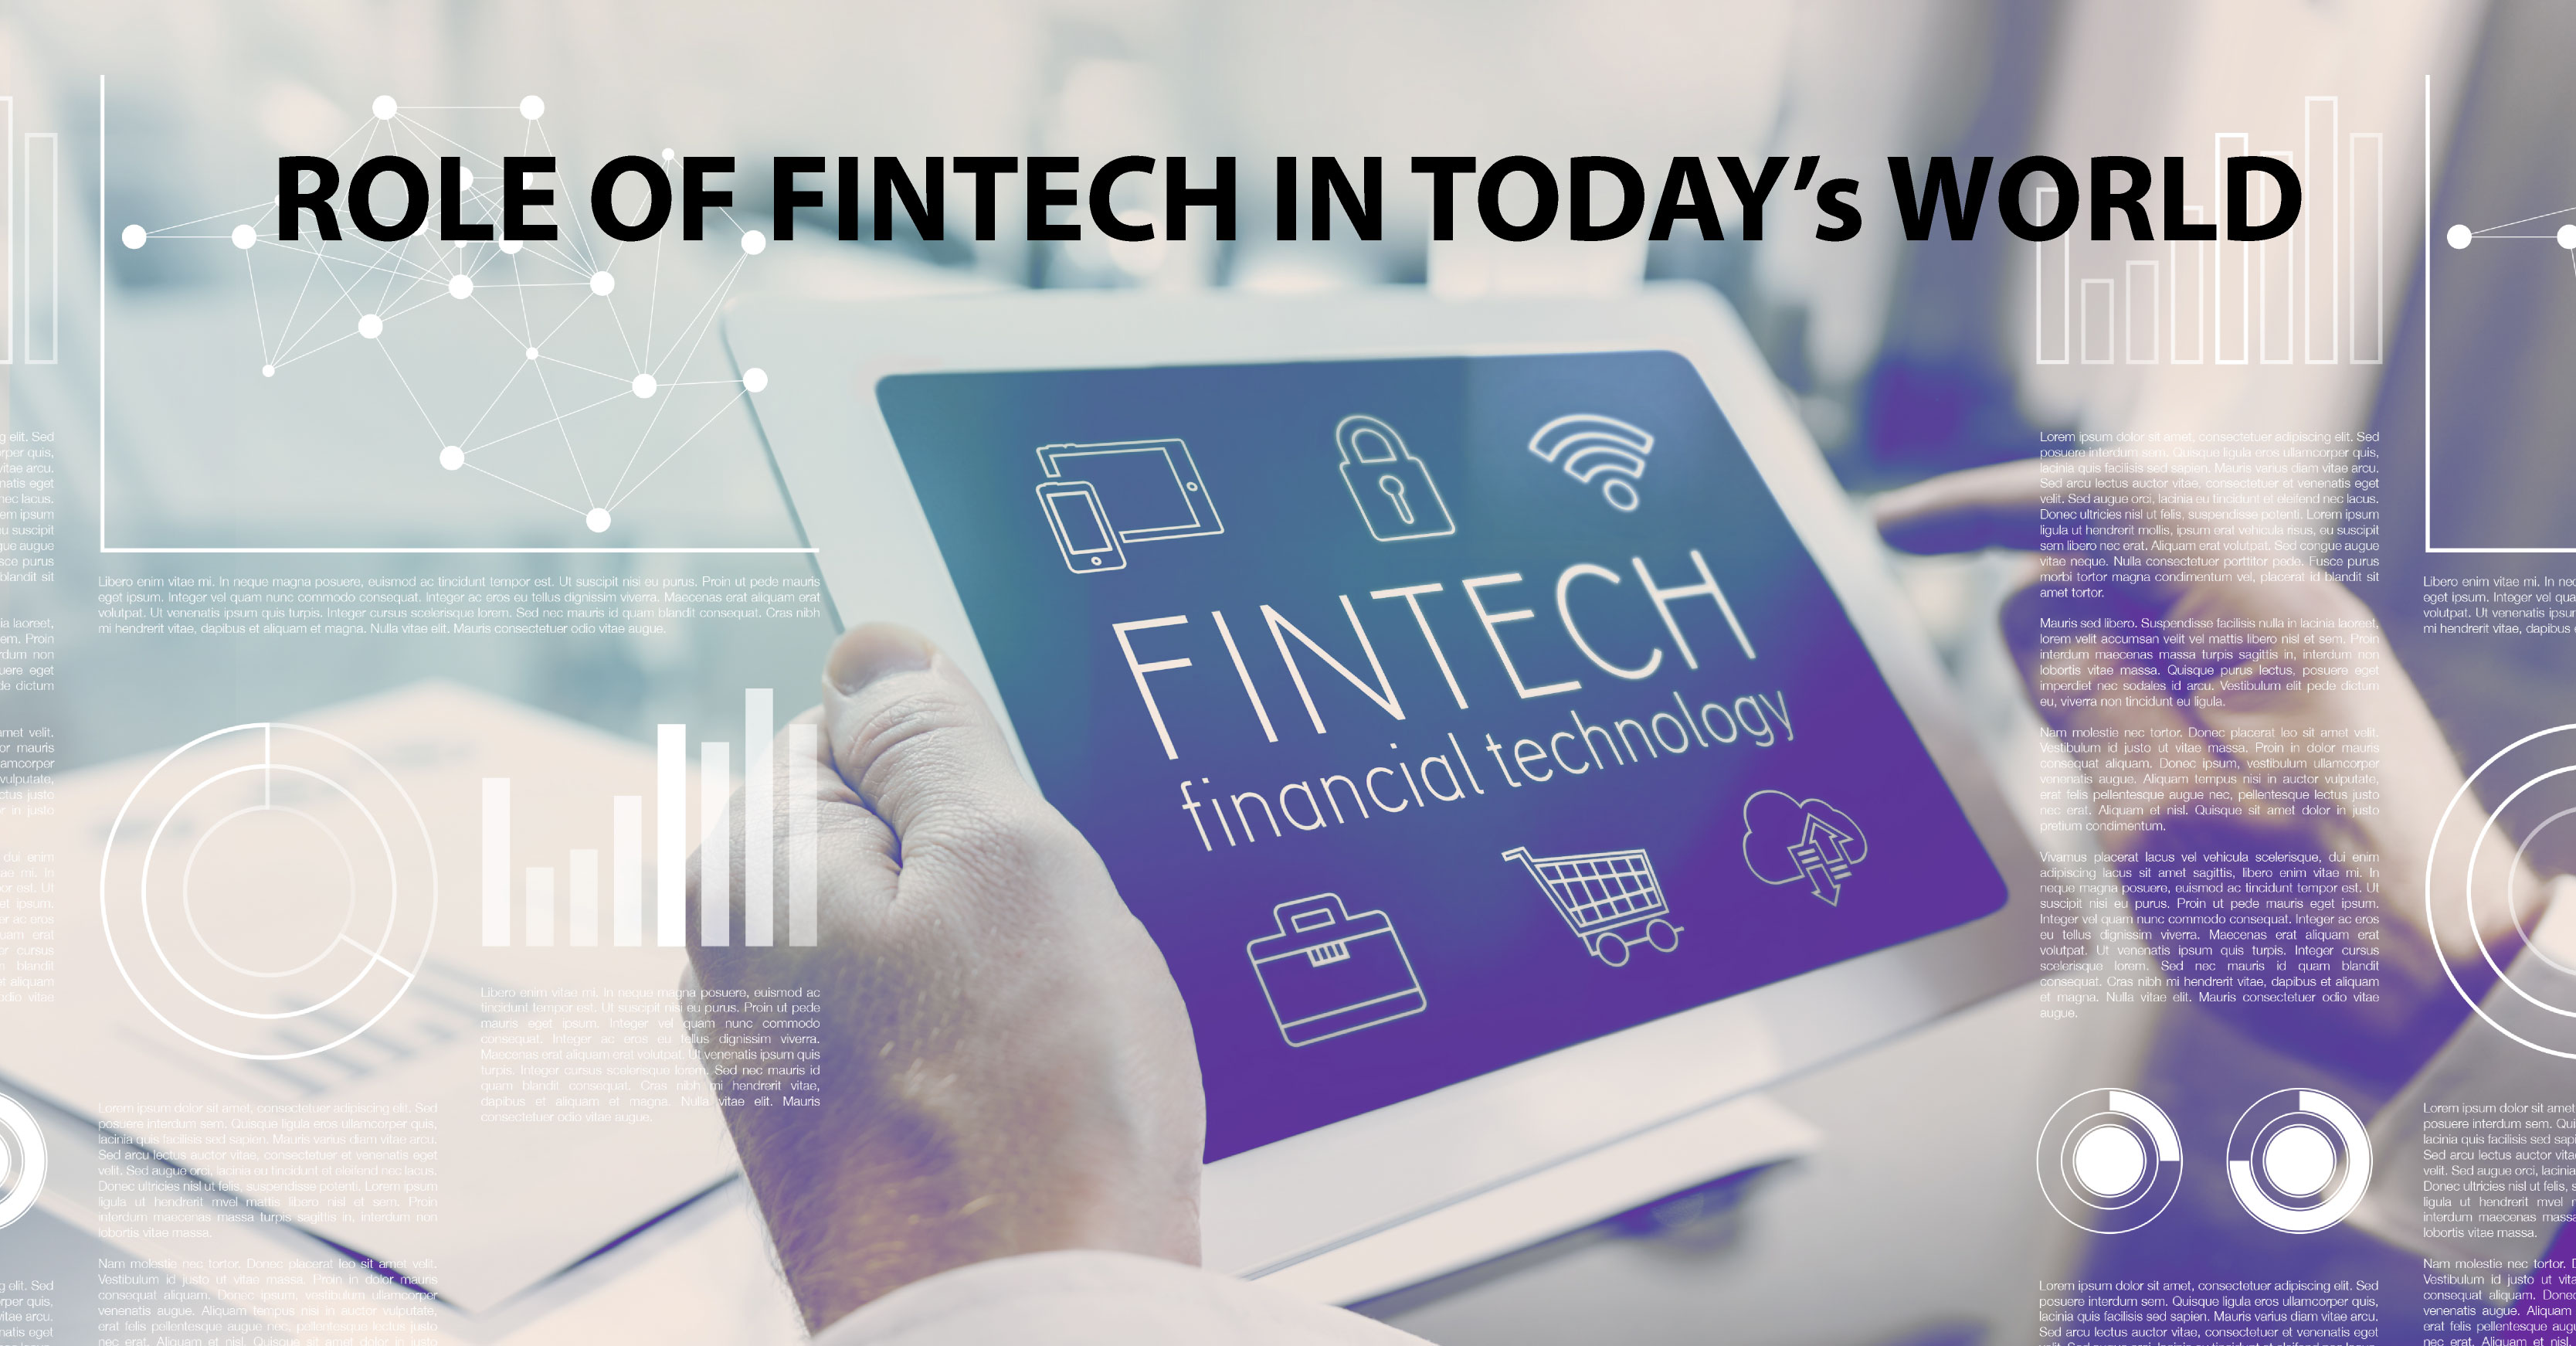 ROLE OF FINTECH IN TODAY’S WORLD